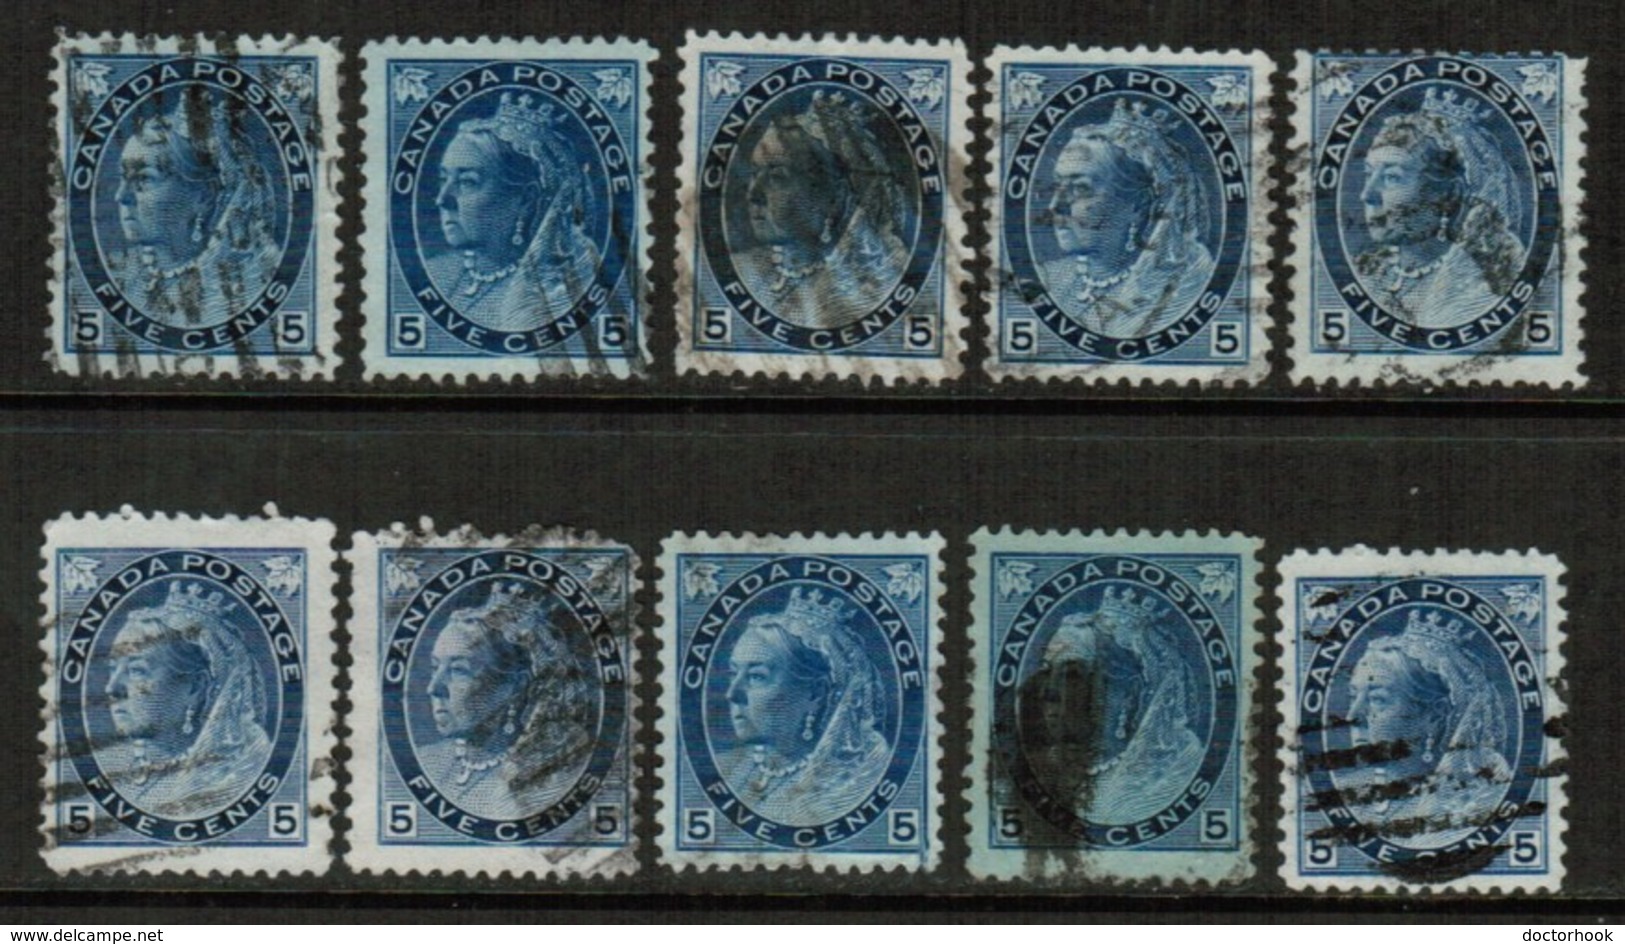 CANADA  Scott # 79 USED WHOLESALE LOT OF 10 (WH-288) - Lots & Kiloware (mixtures) - Max. 999 Stamps